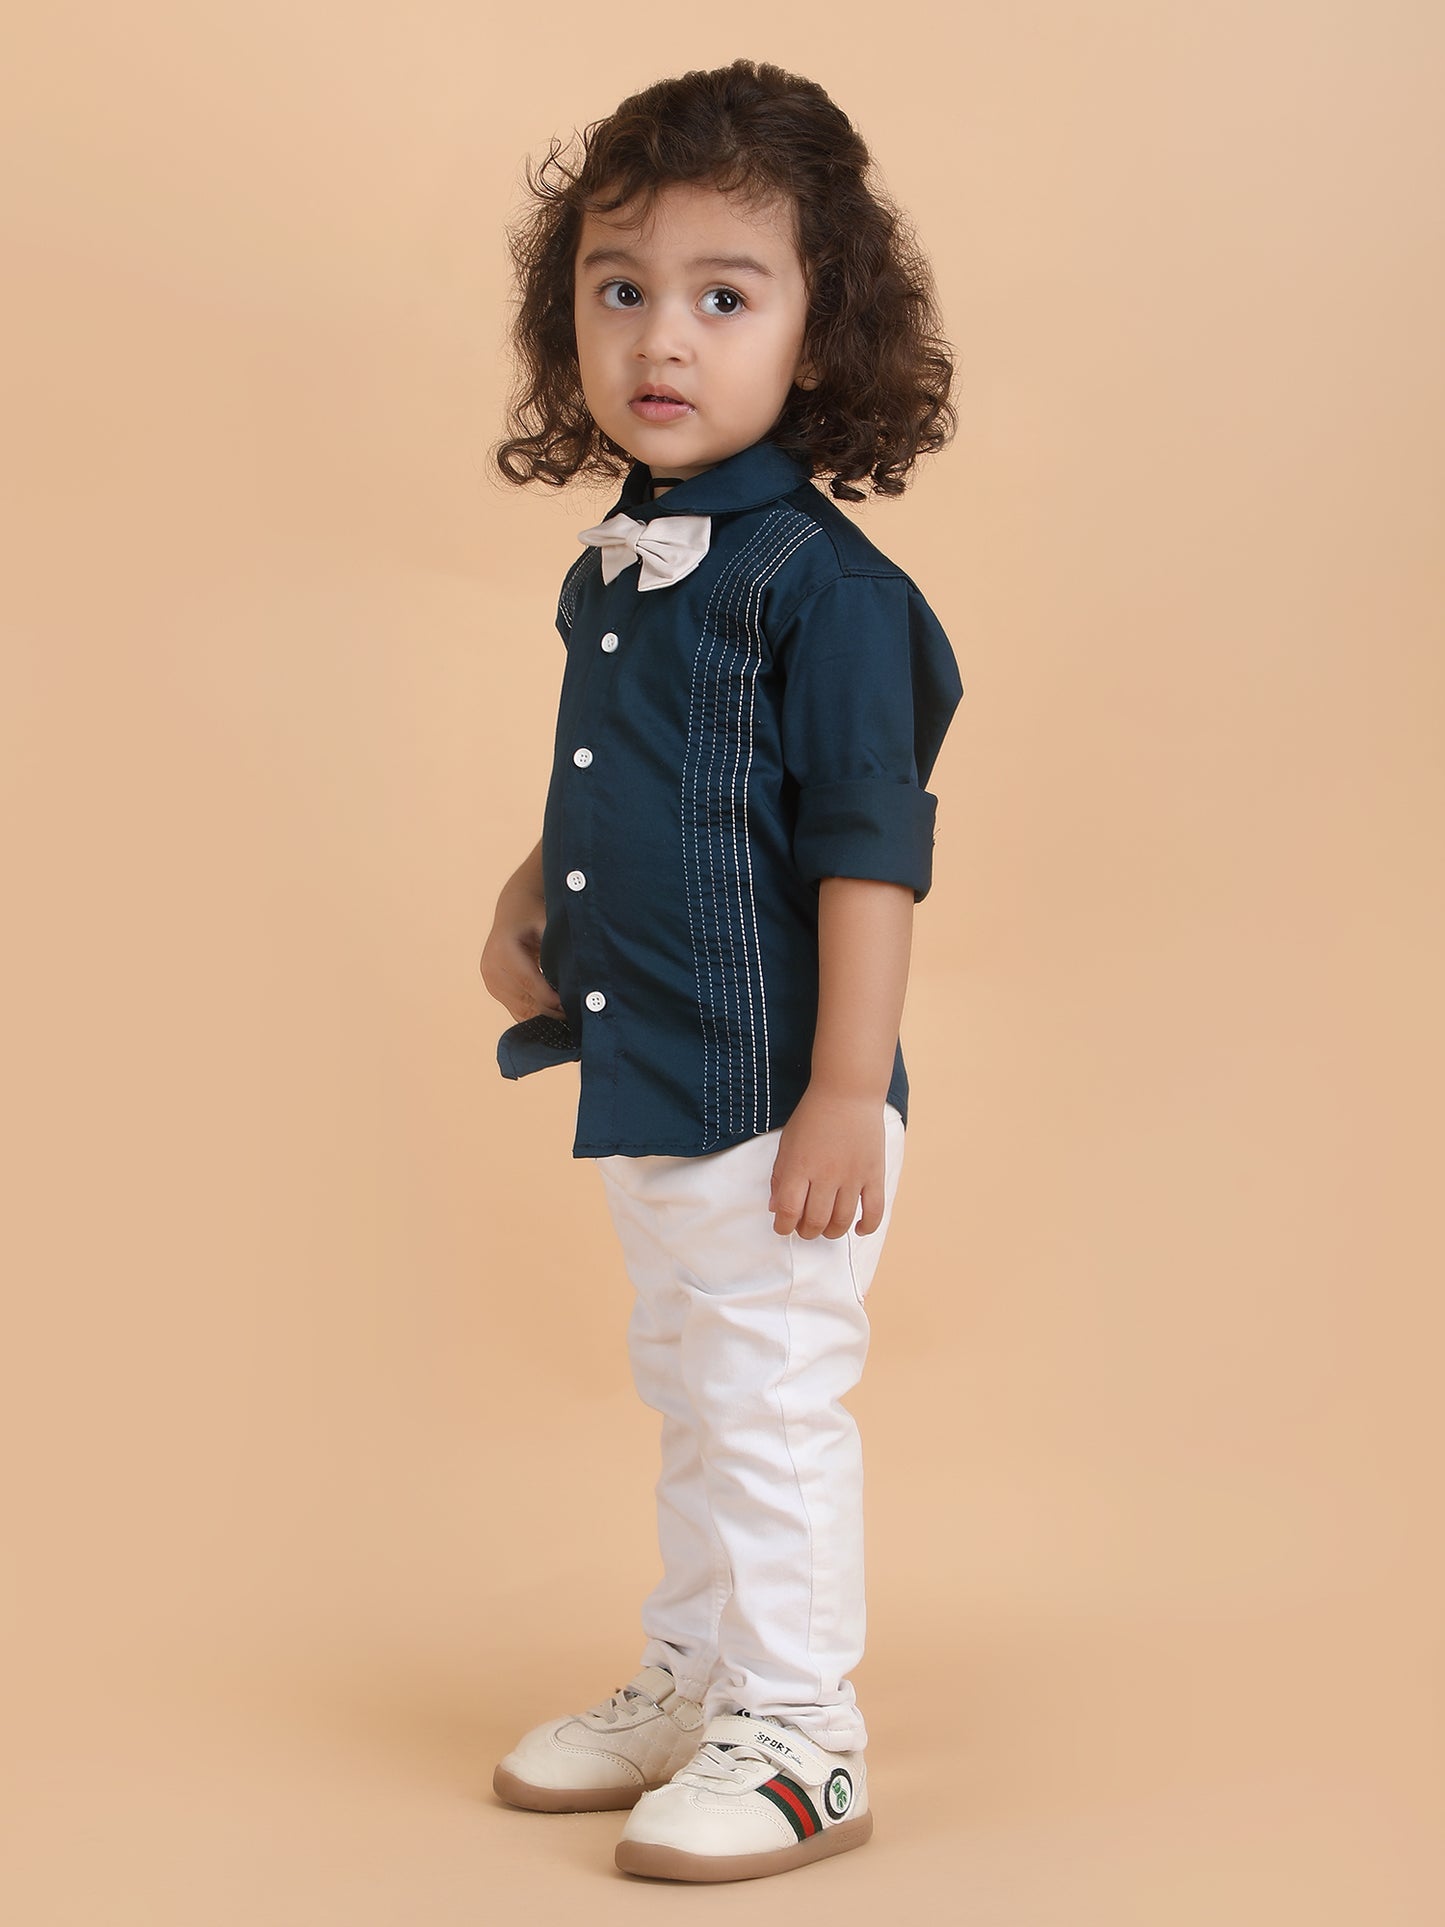 Polka Tots Full sleeves Lining shirt with Bow - Navy Blue